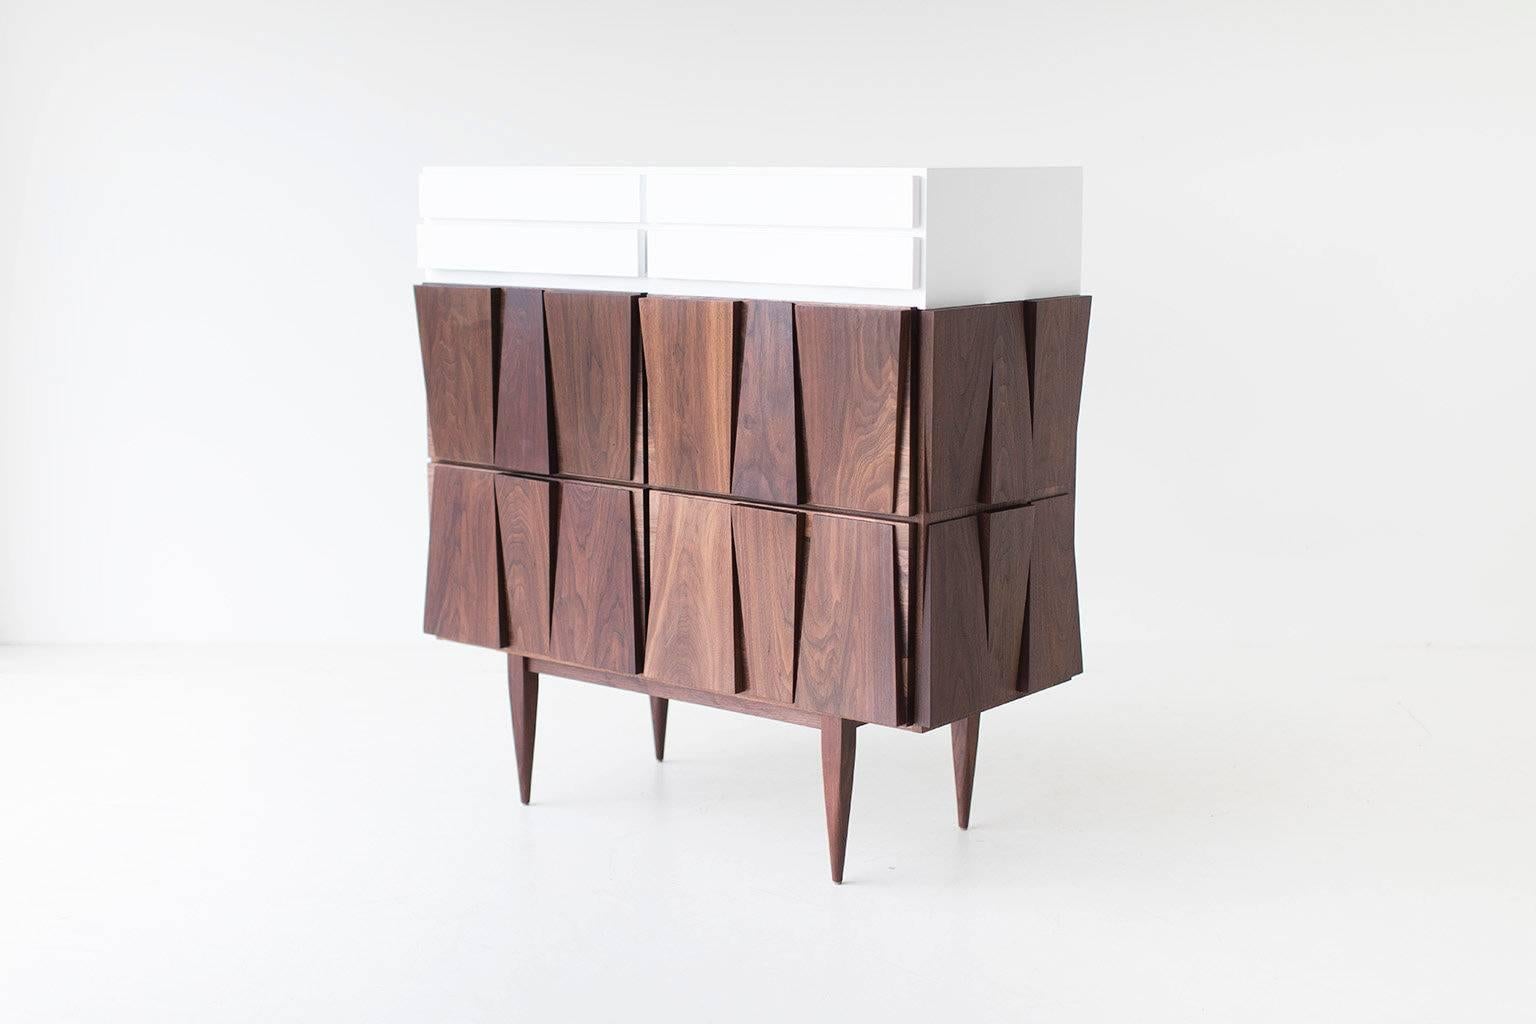 Modern Dresser - 1608 - Craft Associates® Furniture is expertly crafted. The base is constructed by hand from hard wood and not machine. The walnut is then shaped by artisans and finished with a hand applied oil. This piece is also available in